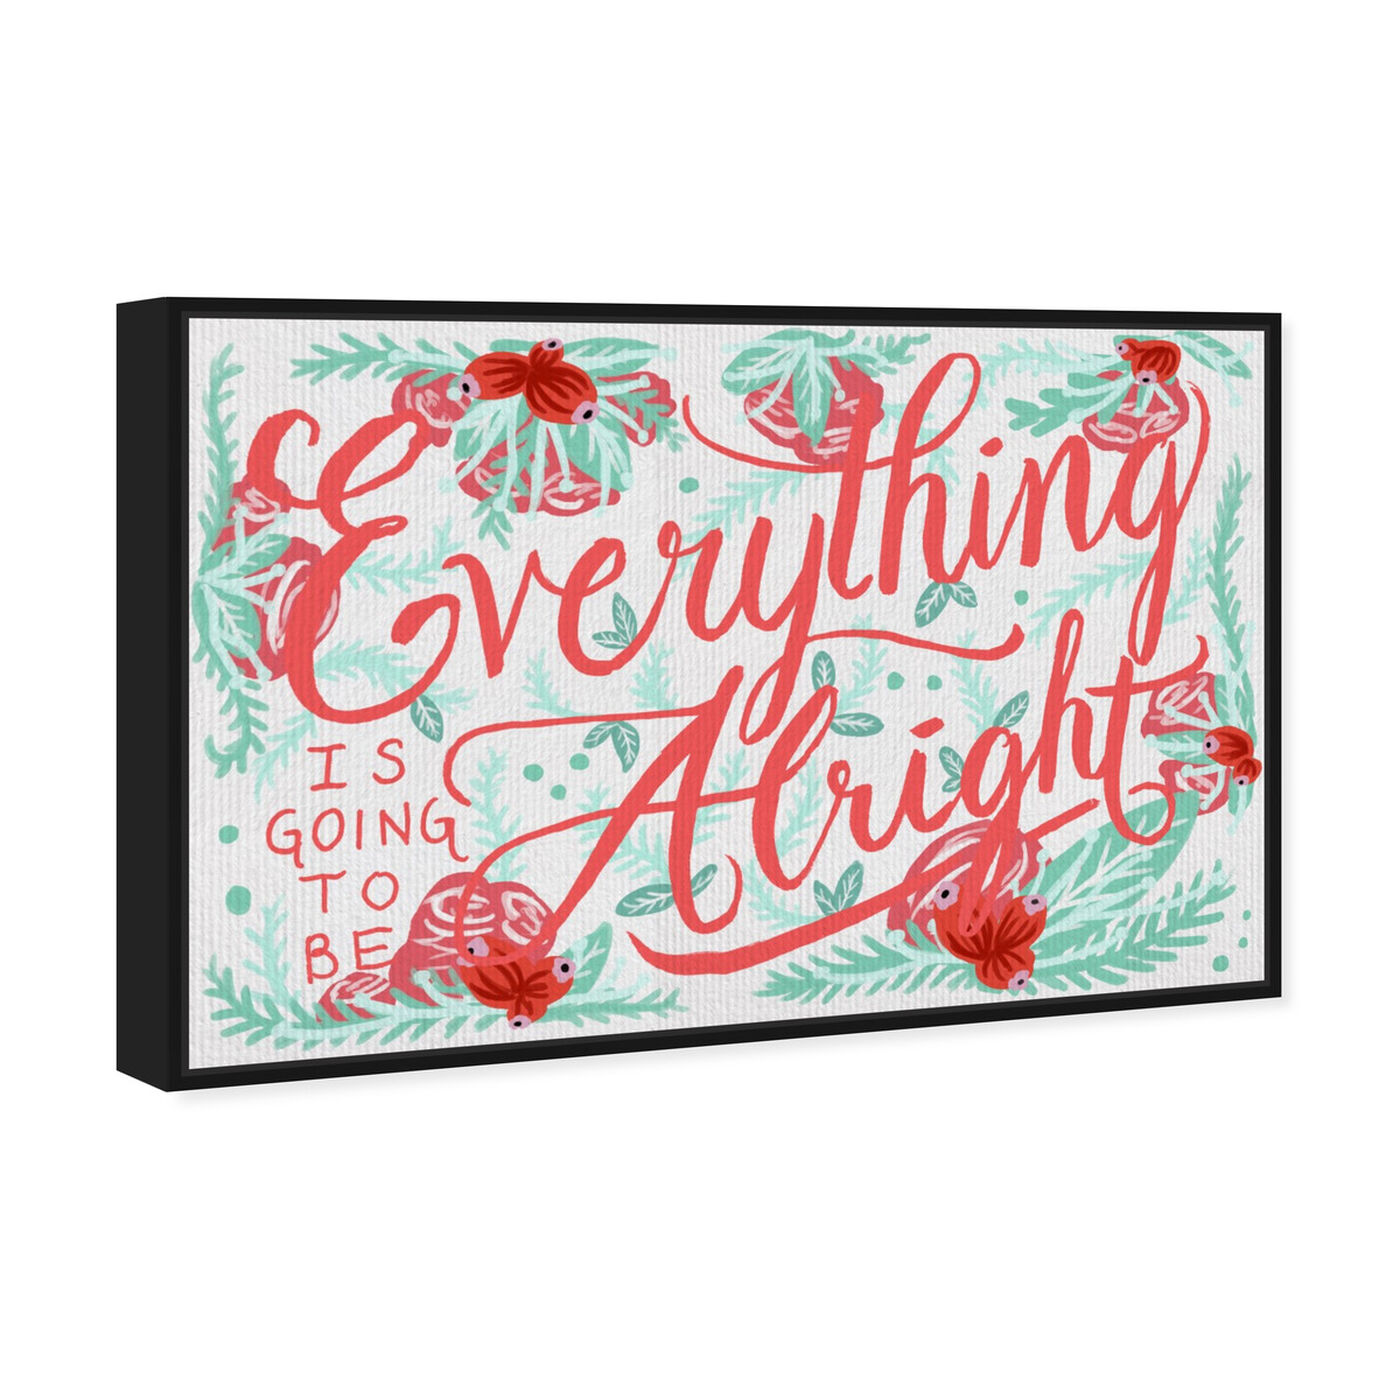 Angled view of Alright Minty I featuring typography and quotes and inspirational quotes and sayings art.